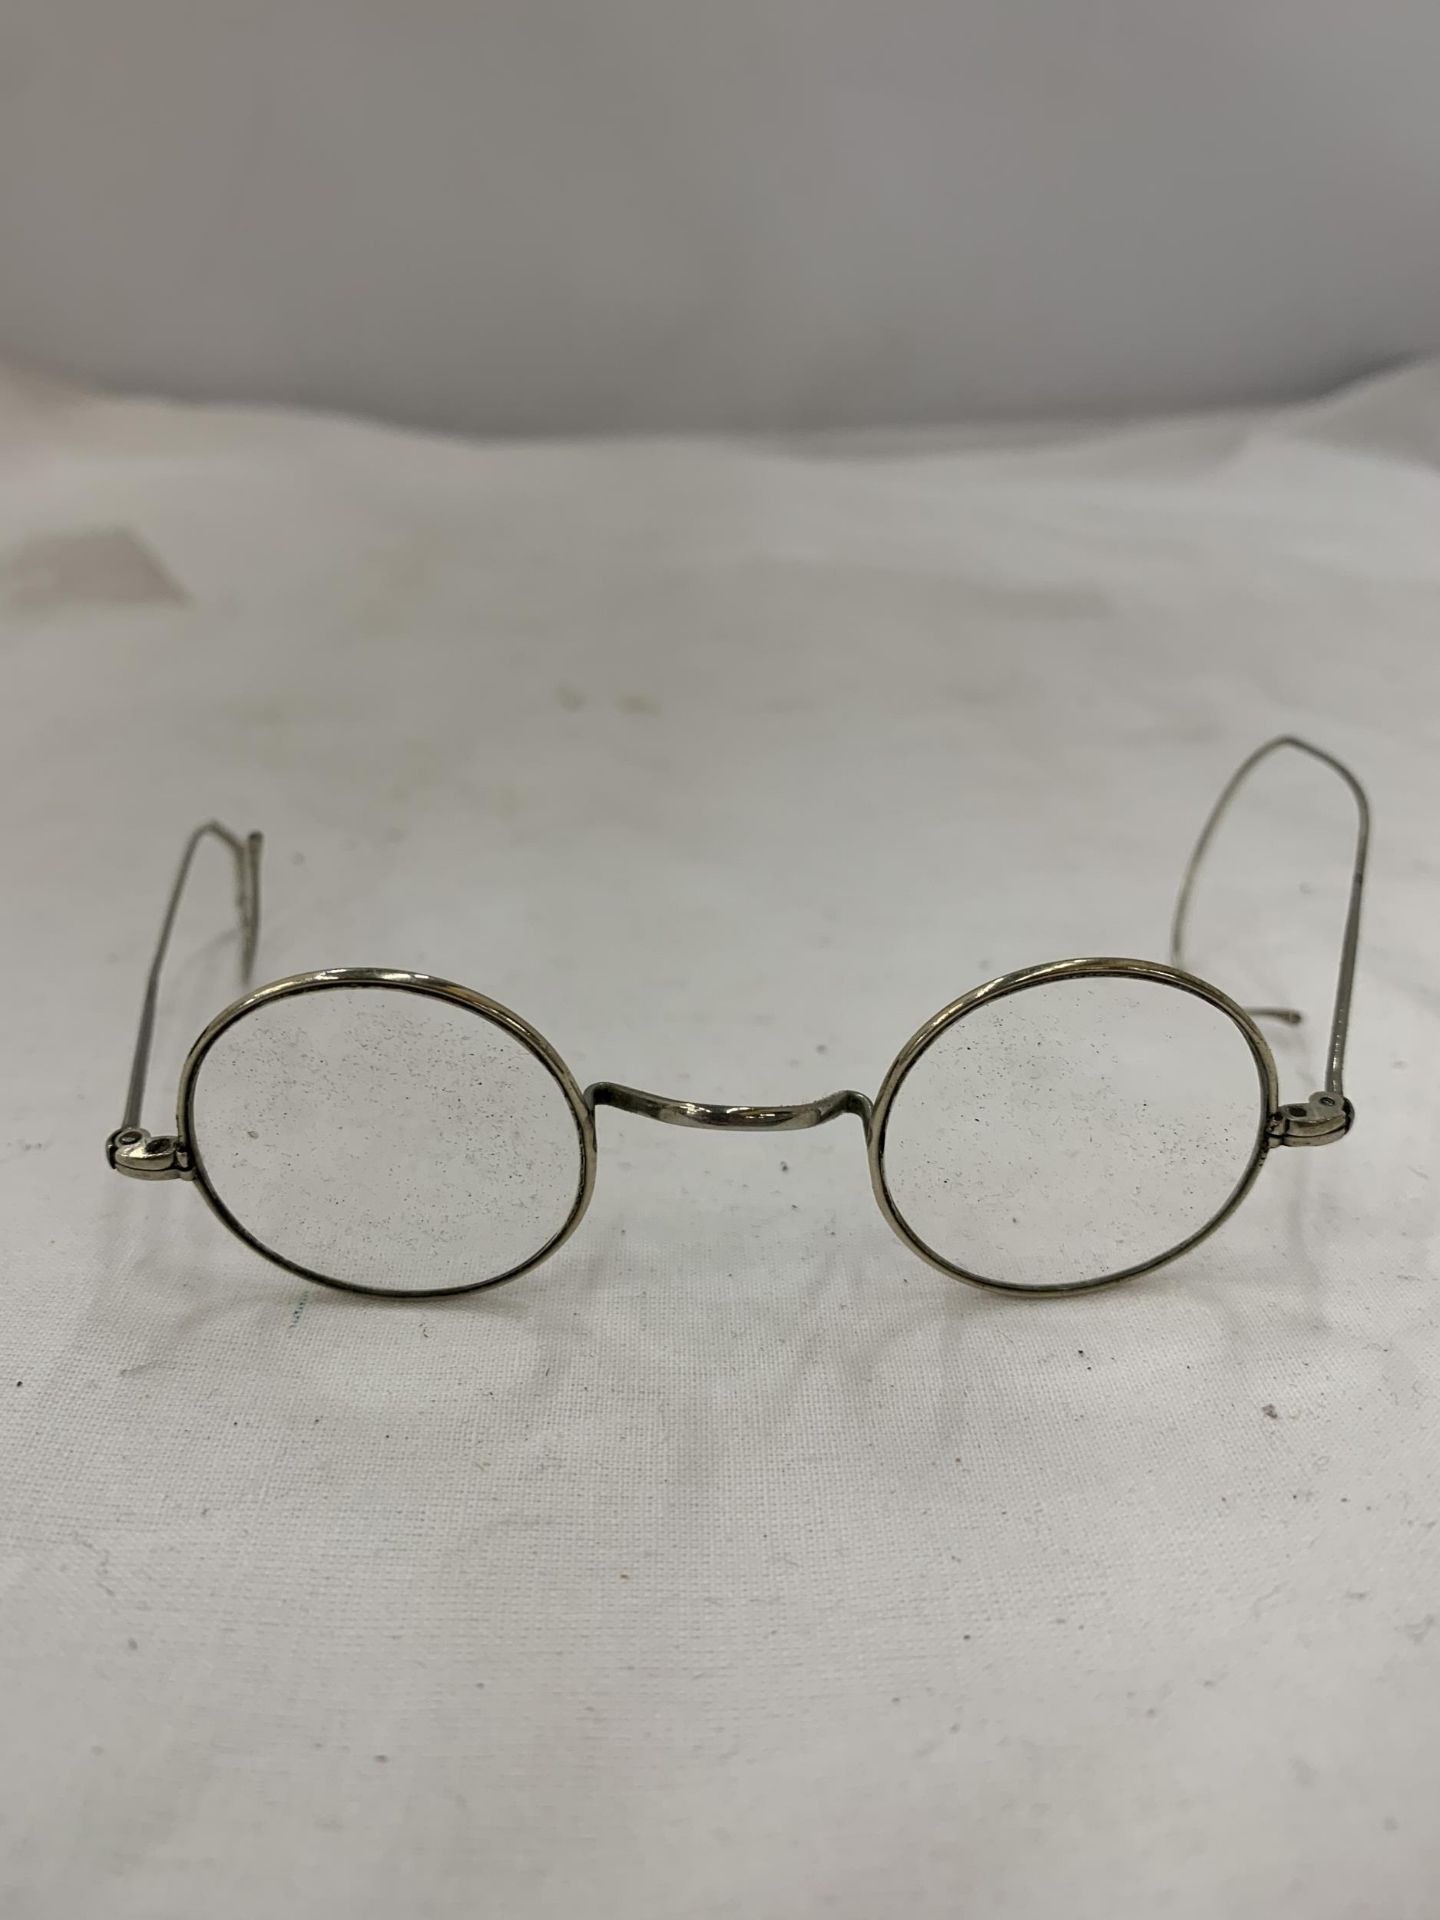 A PAIR OF VICTORIAN SPECTACLES, CASED - Image 2 of 3